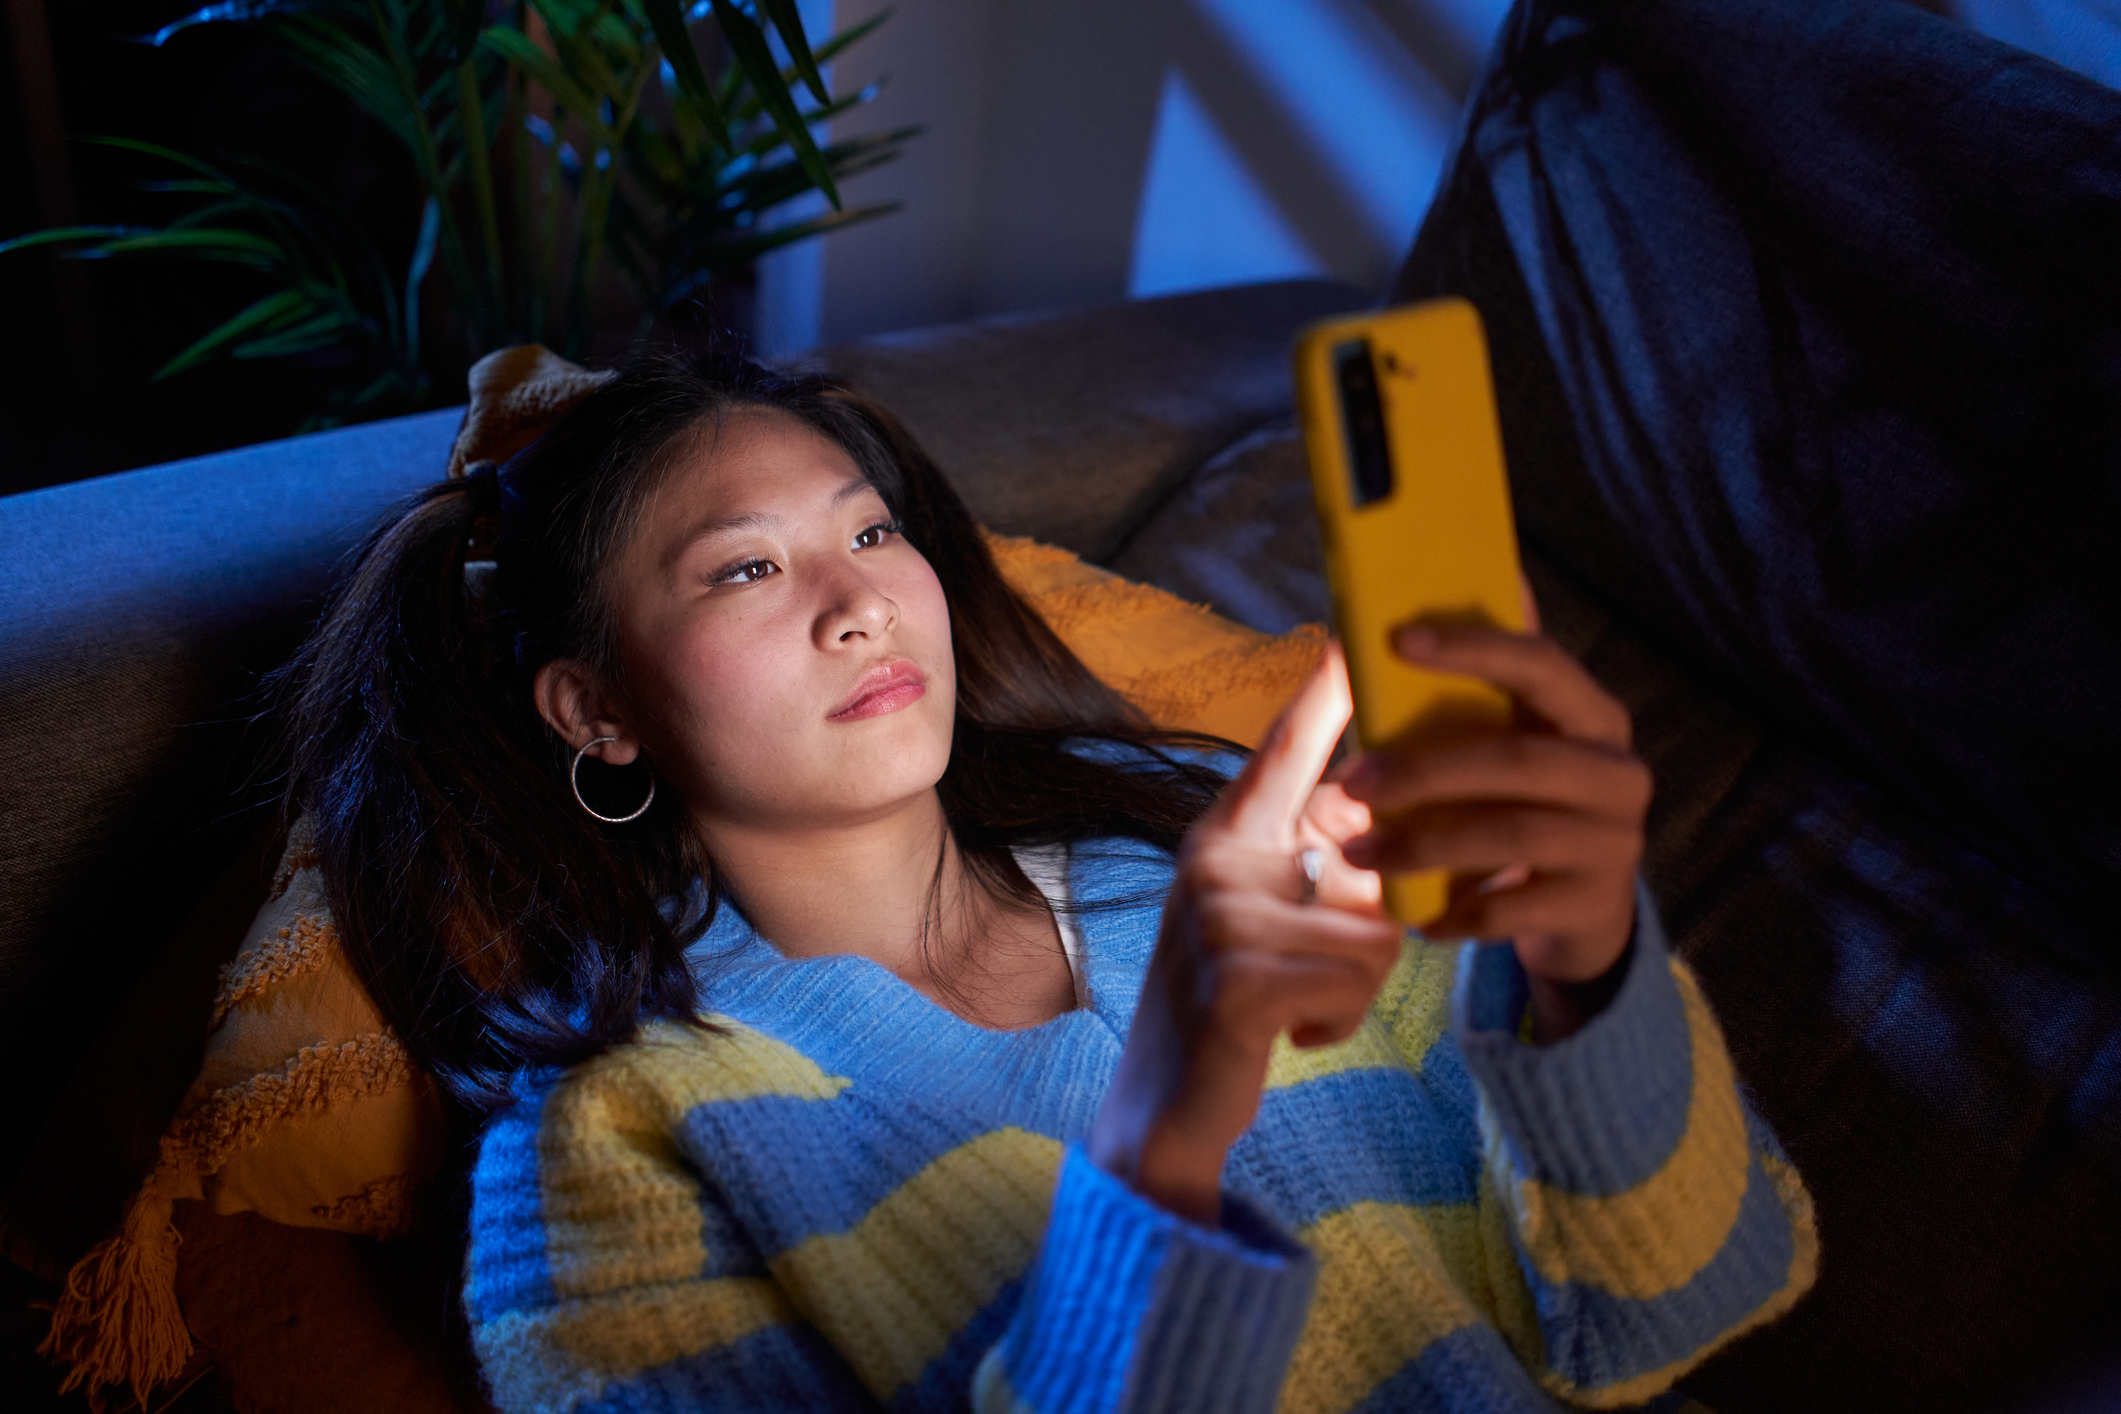 A woman in a striped sweater lies on a couch, focused on her phone